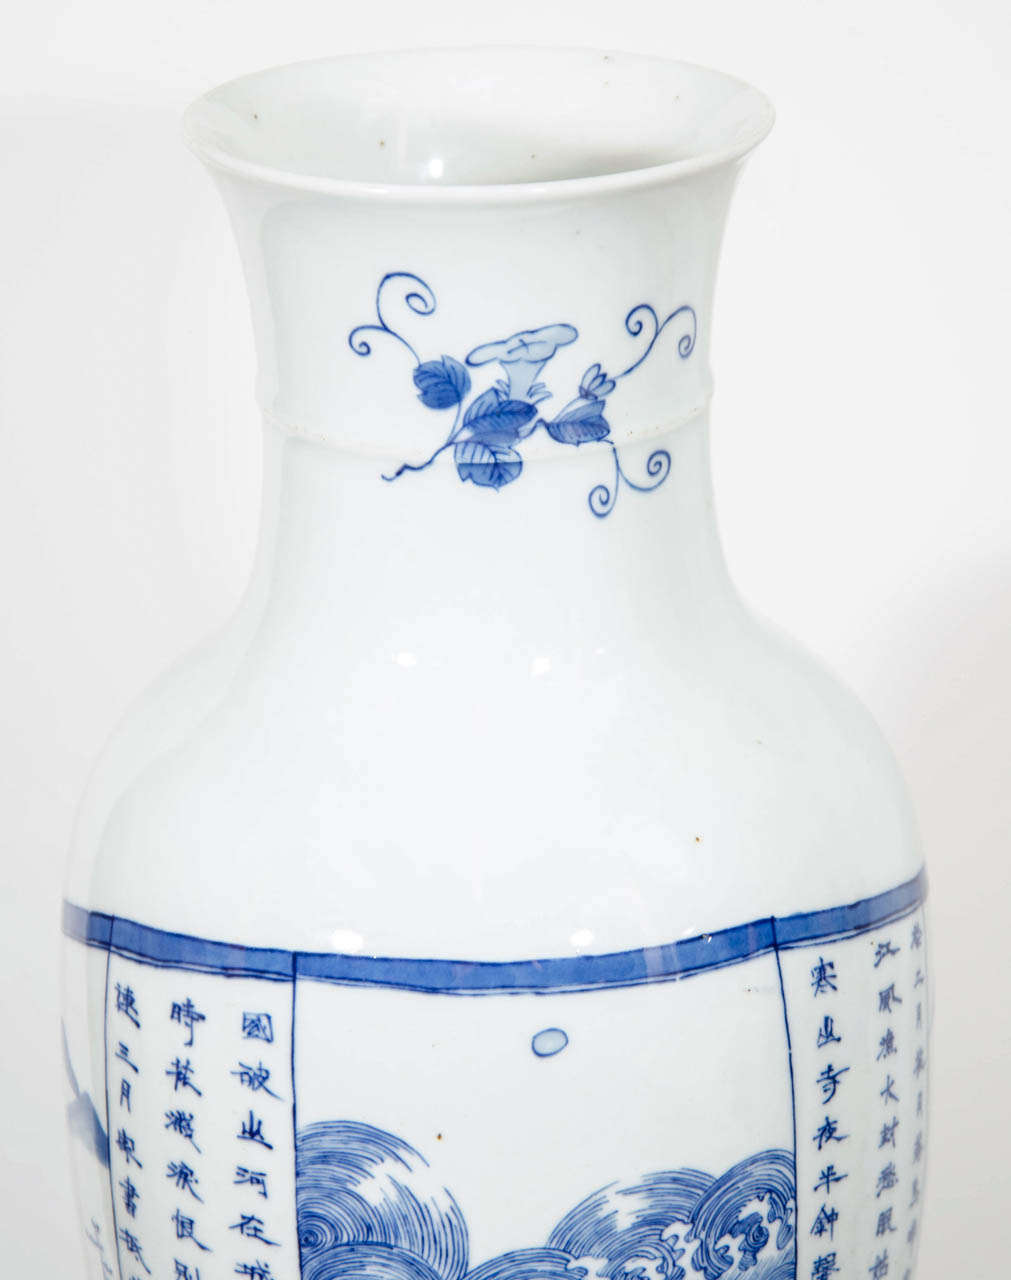 19th Century Chinese Guangxu Period Porcelain Vase with 